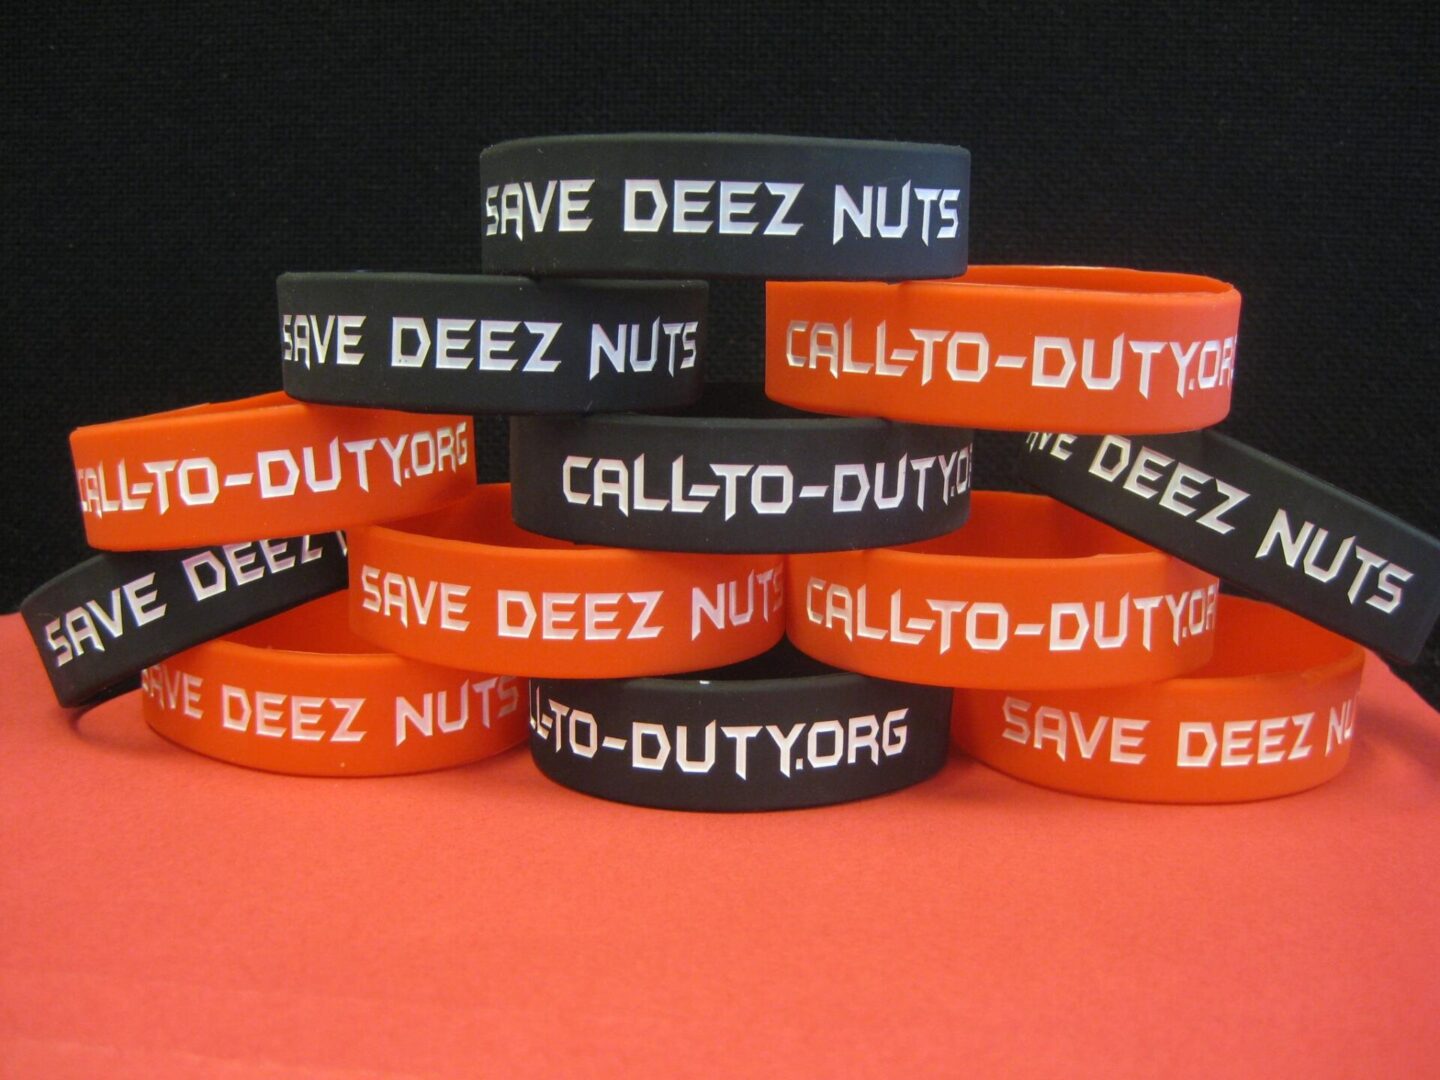 A stack of orange and black Save Deez Nuts wristband 6 pack.